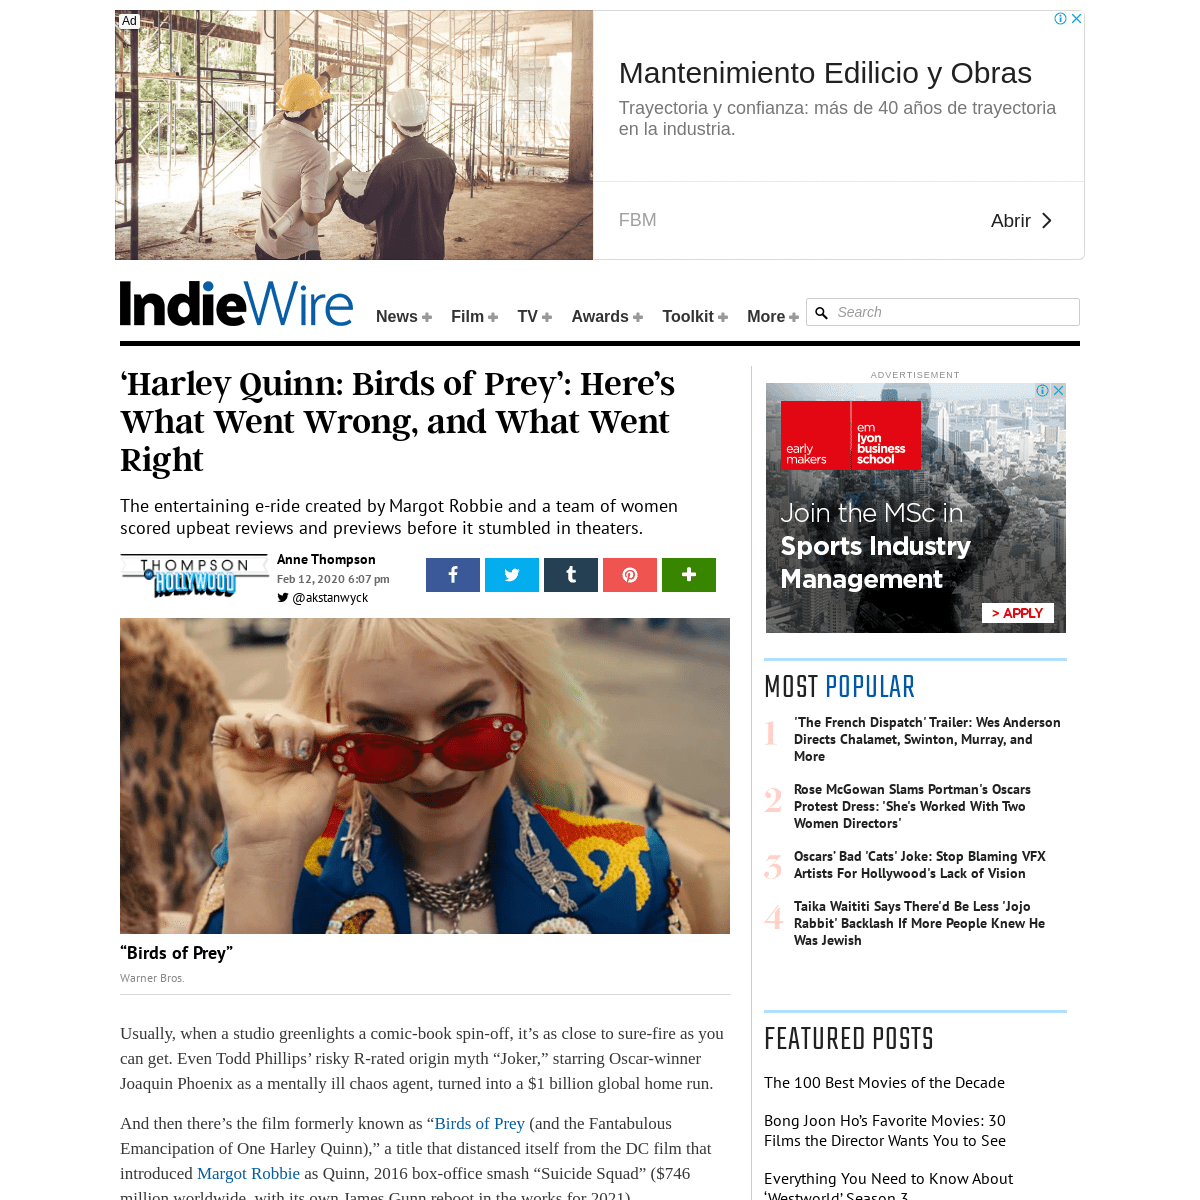 A complete backup of www.indiewire.com/2020/02/box-office-what-went-wrong-with-birds-of-prey-harley-quinn-what-went-right-120221